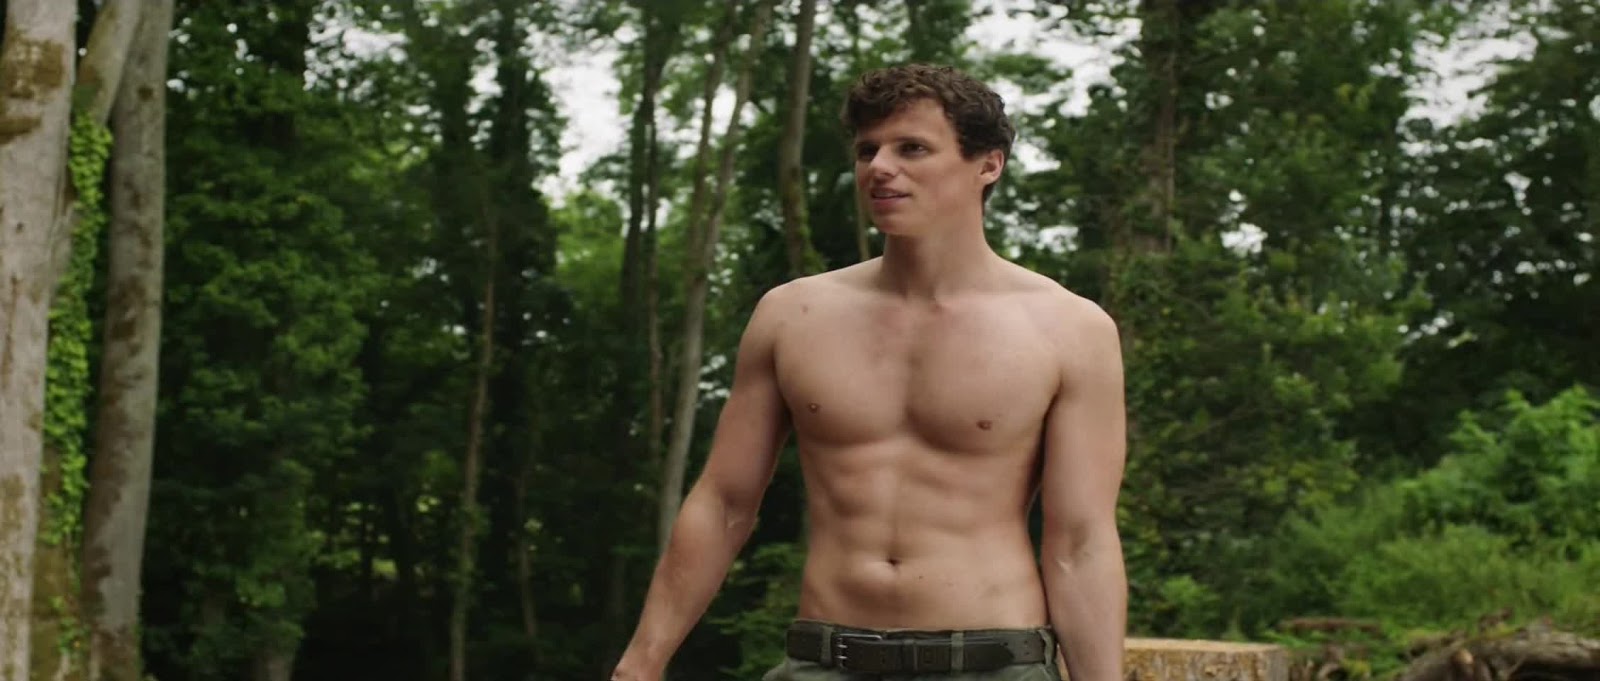 The Stars Come Out To Play Ruairi OConnor Shirtless In Delicious.